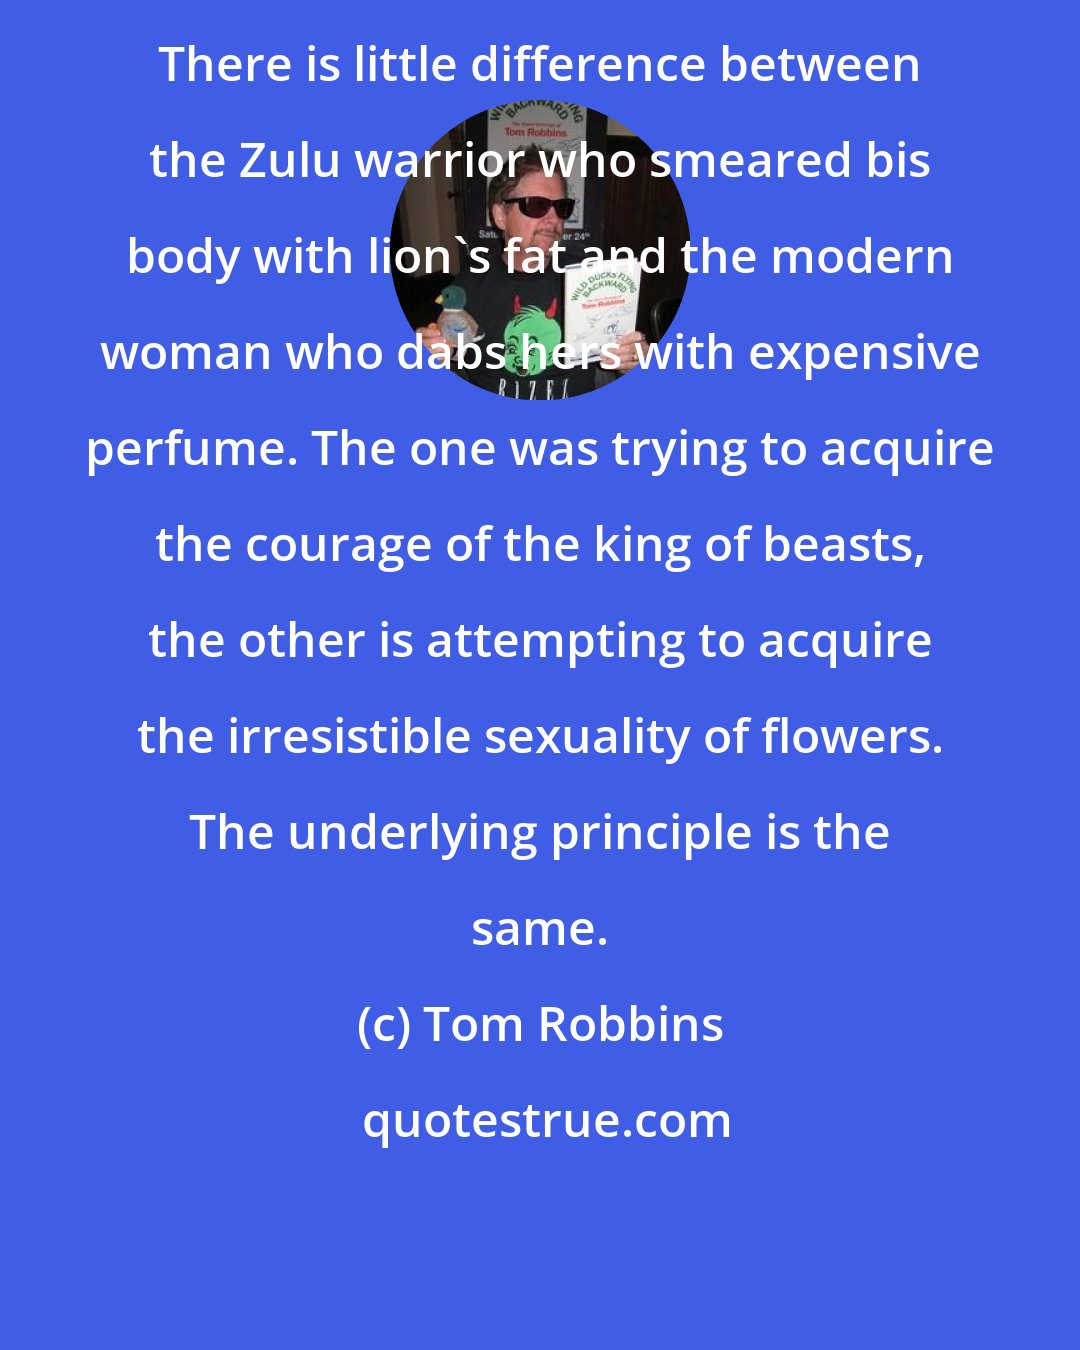 Tom Robbins: There is little difference between the Zulu warrior who smeared bis body with lion's fat and the modern woman who dabs hers with expensive perfume. The one was trying to acquire the courage of the king of beasts, the other is attempting to acquire the irresistible sexuality of flowers. The underlying principle is the same.